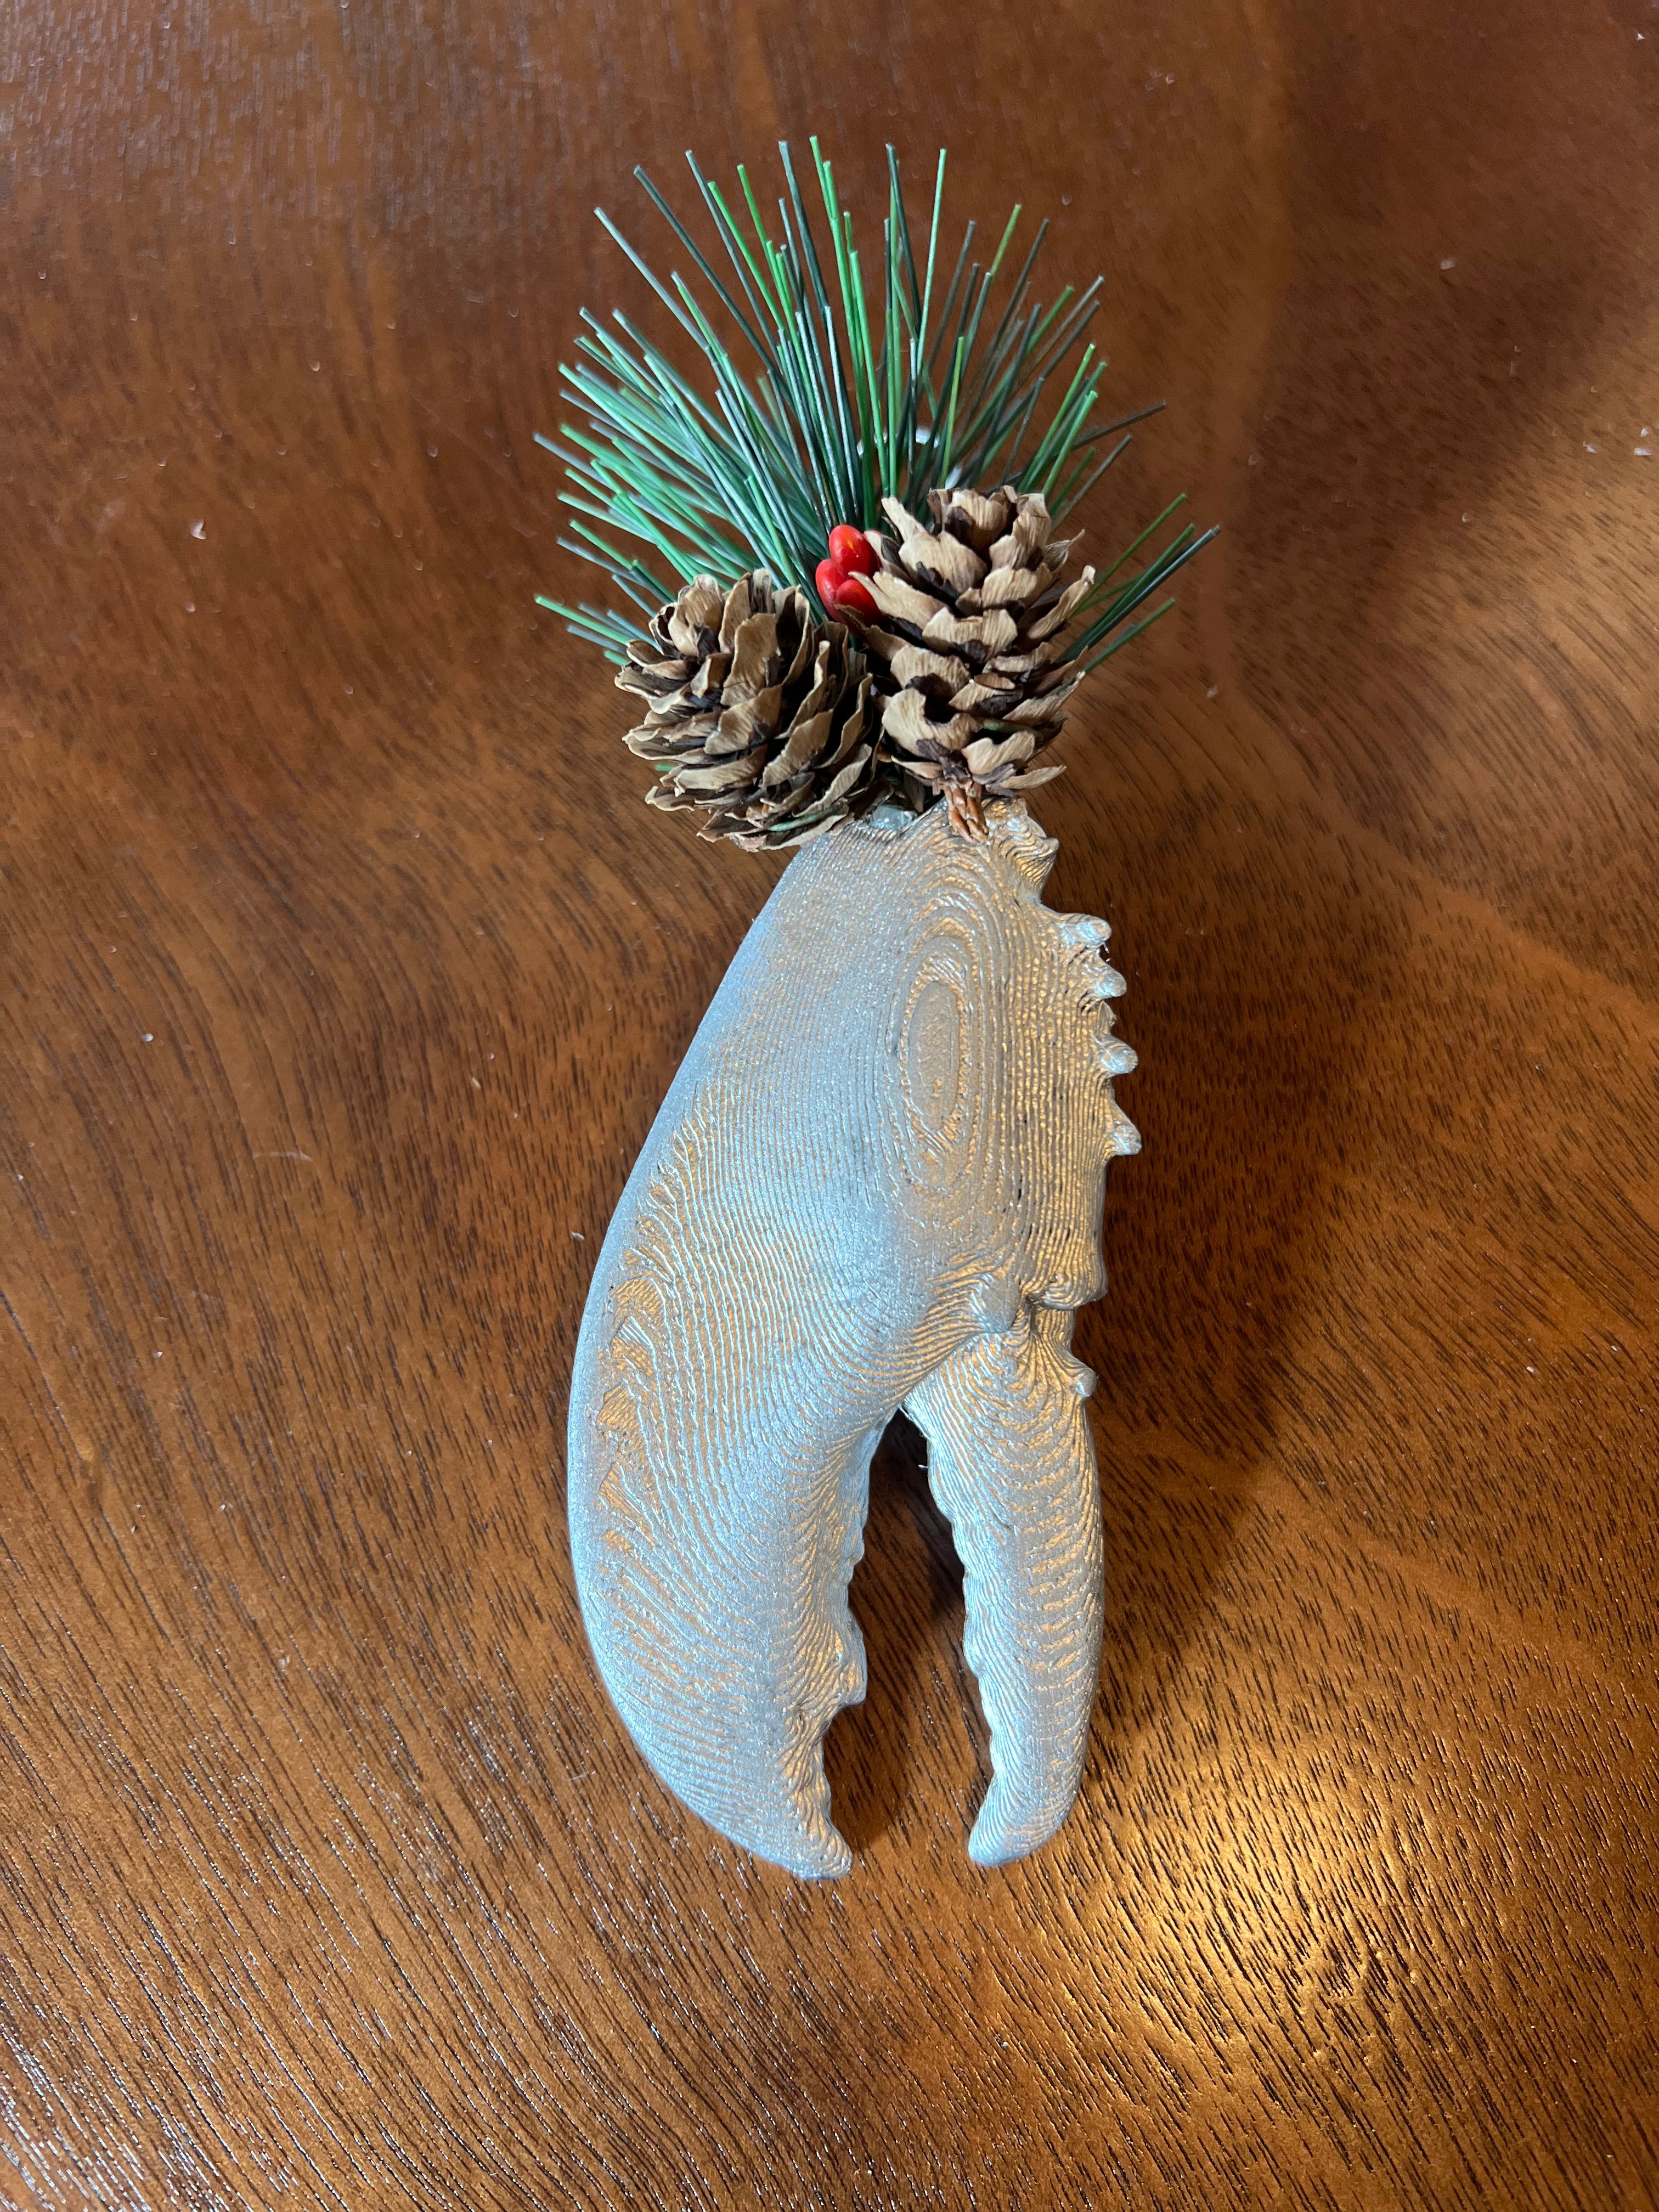 Only 45.00 usd for Blue Lobster Ornament Online at the Shop